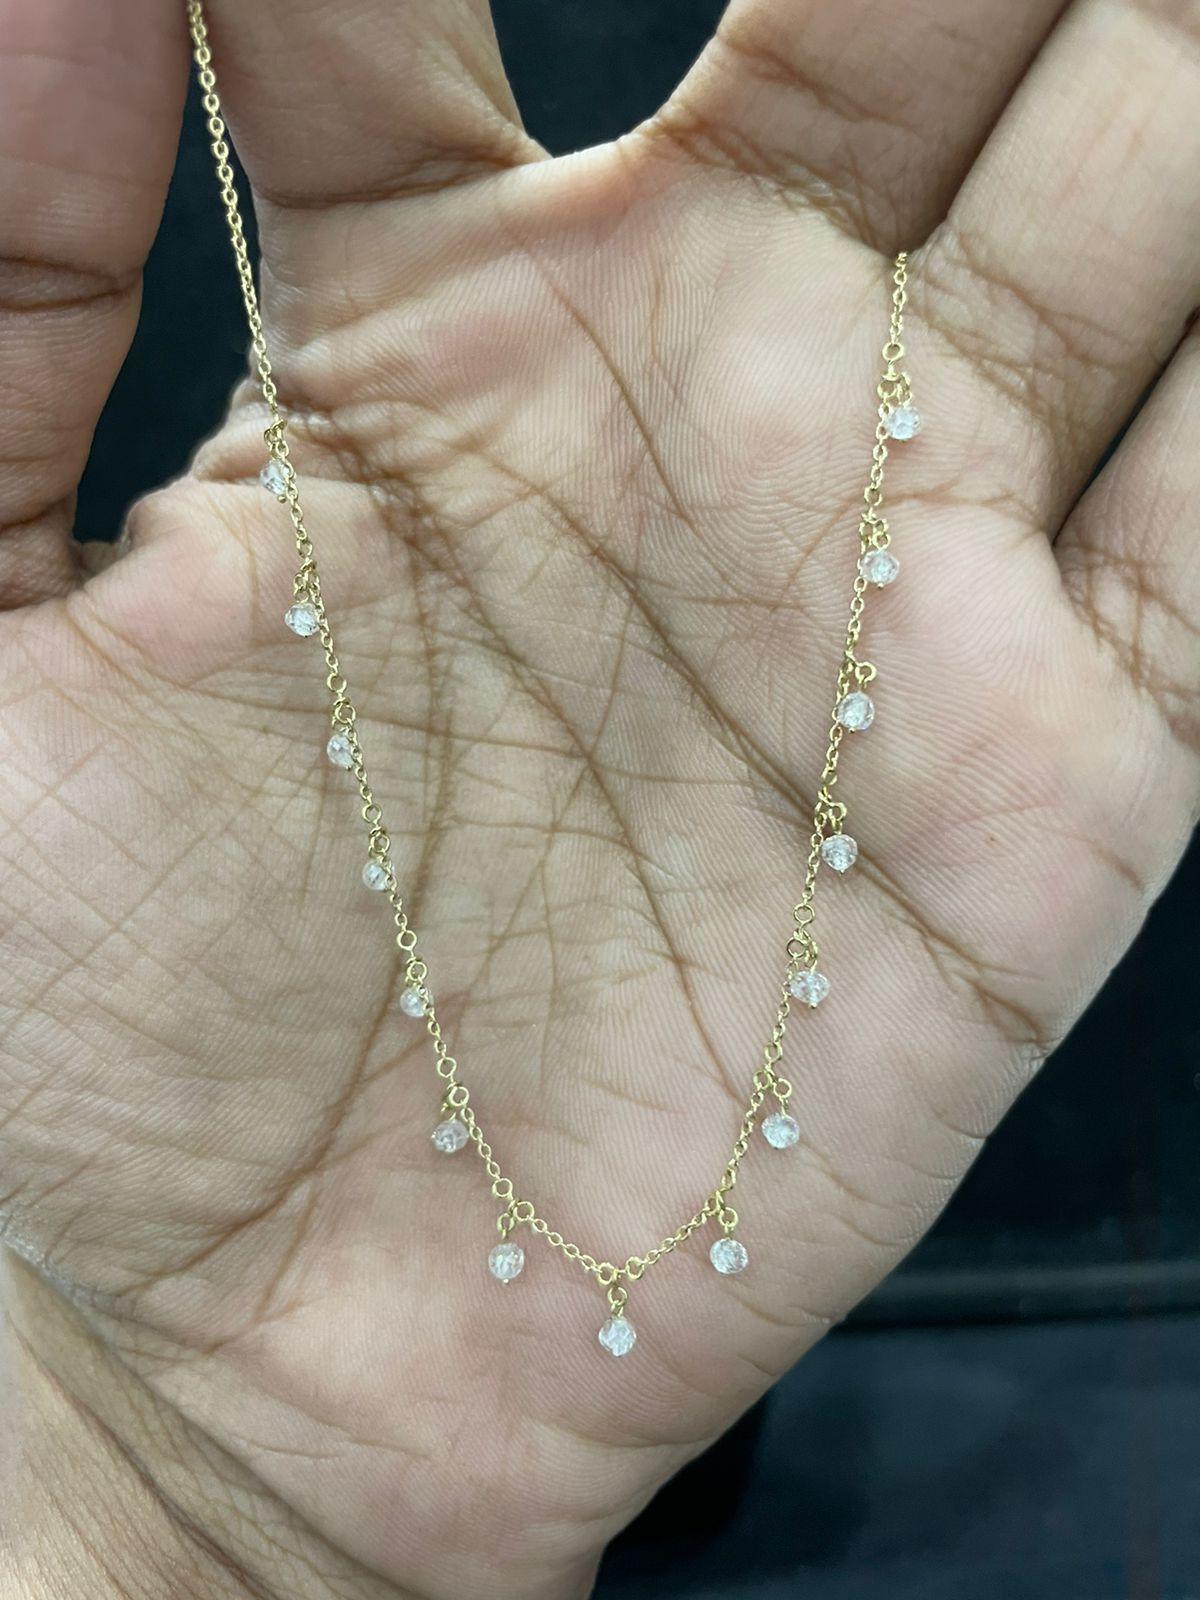 PANIM 18K White Gold Diamond Beads Dangling Necklace In New Condition For Sale In Tsim Sha Tsui, Hong Kong